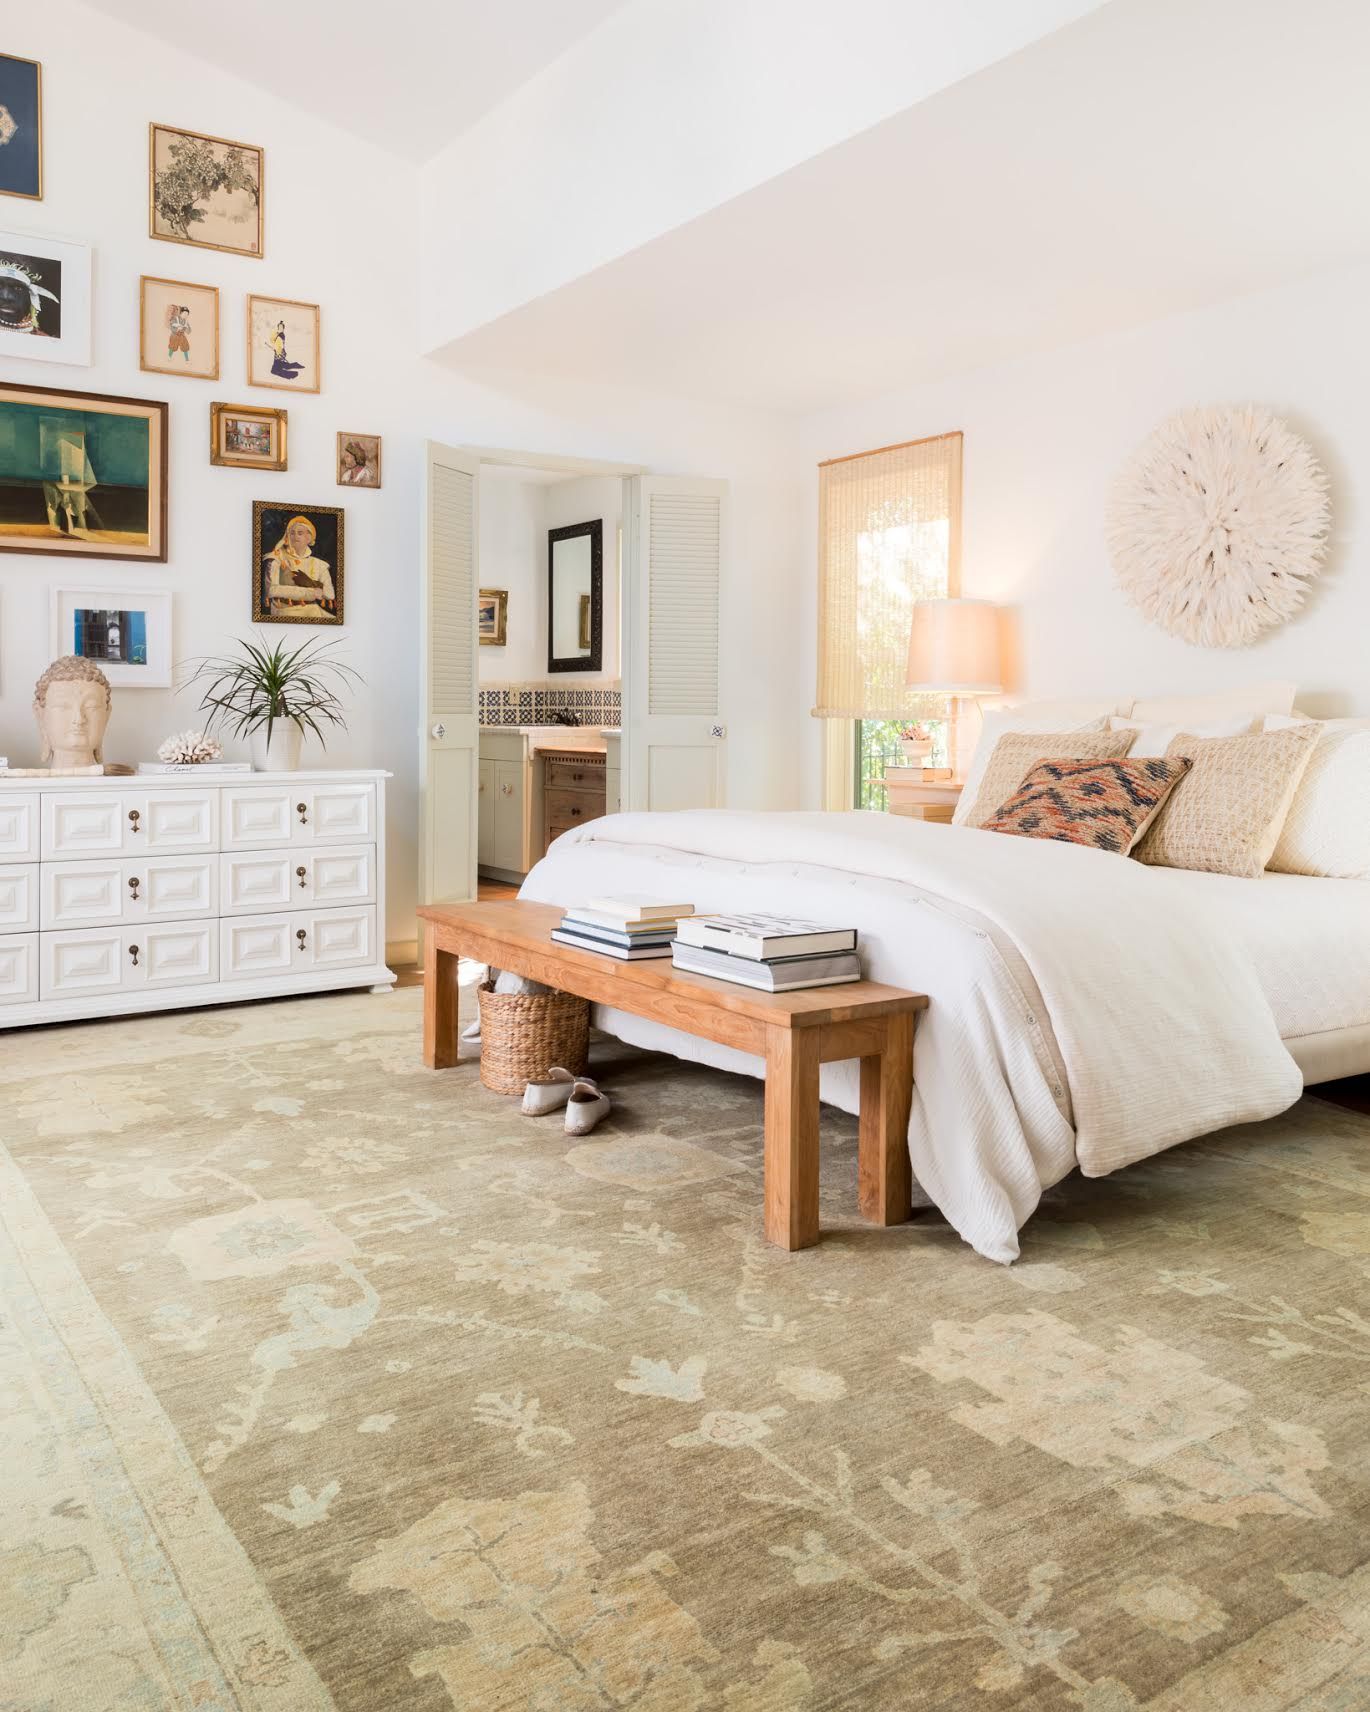 Beyond Aesthetics: The Practical Benefits Of Bedroom Rug Choices